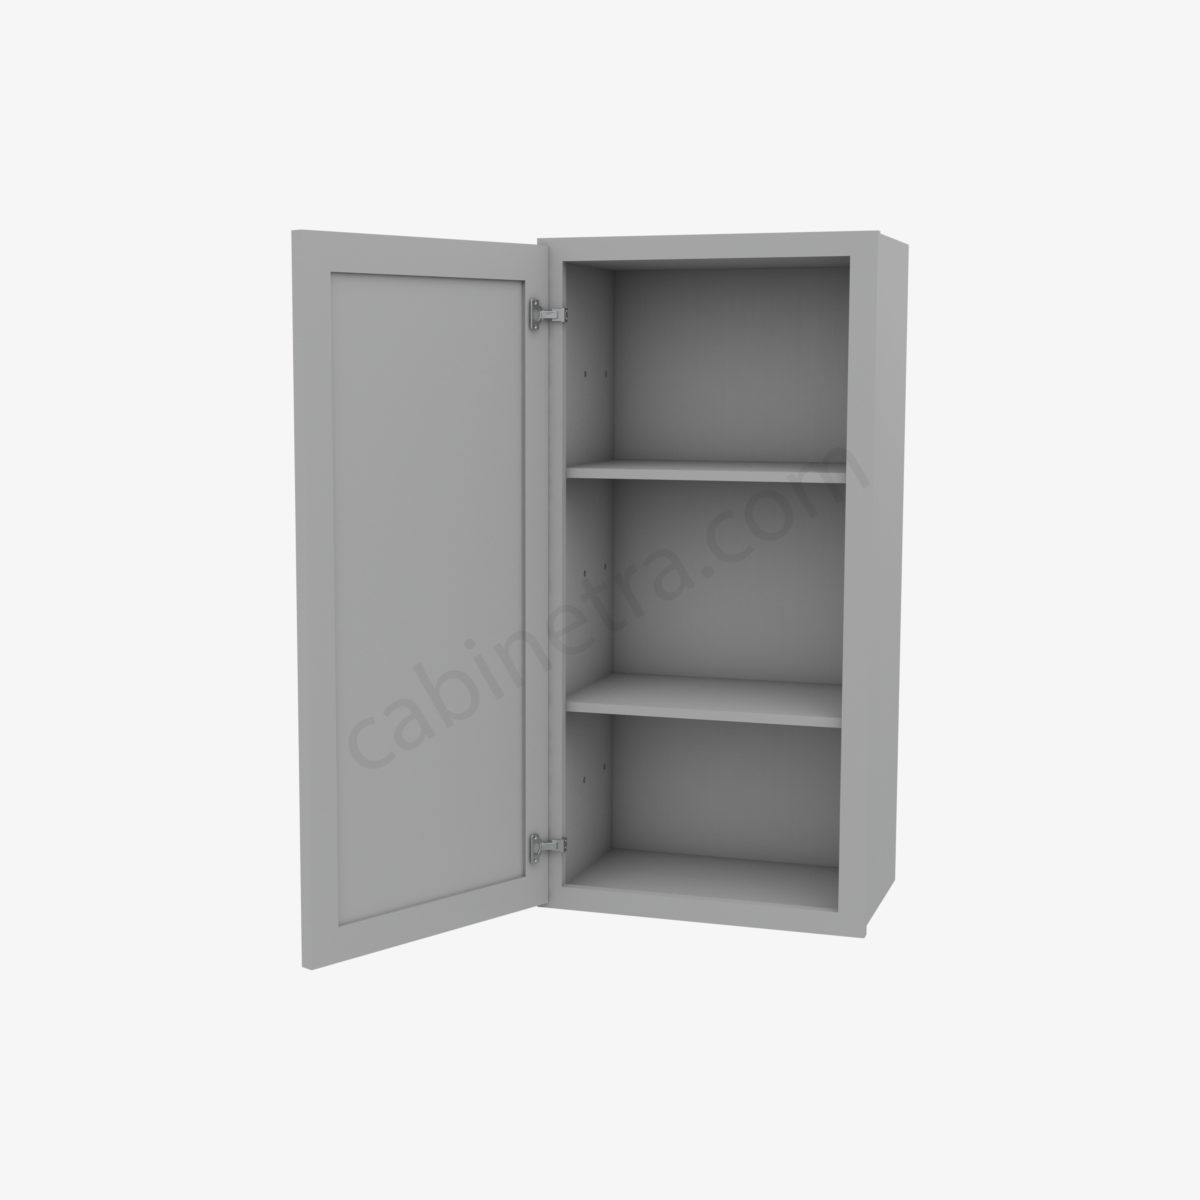 AB W1836 5 Forevermark Lait Gray Shaker Cabinetra scaled